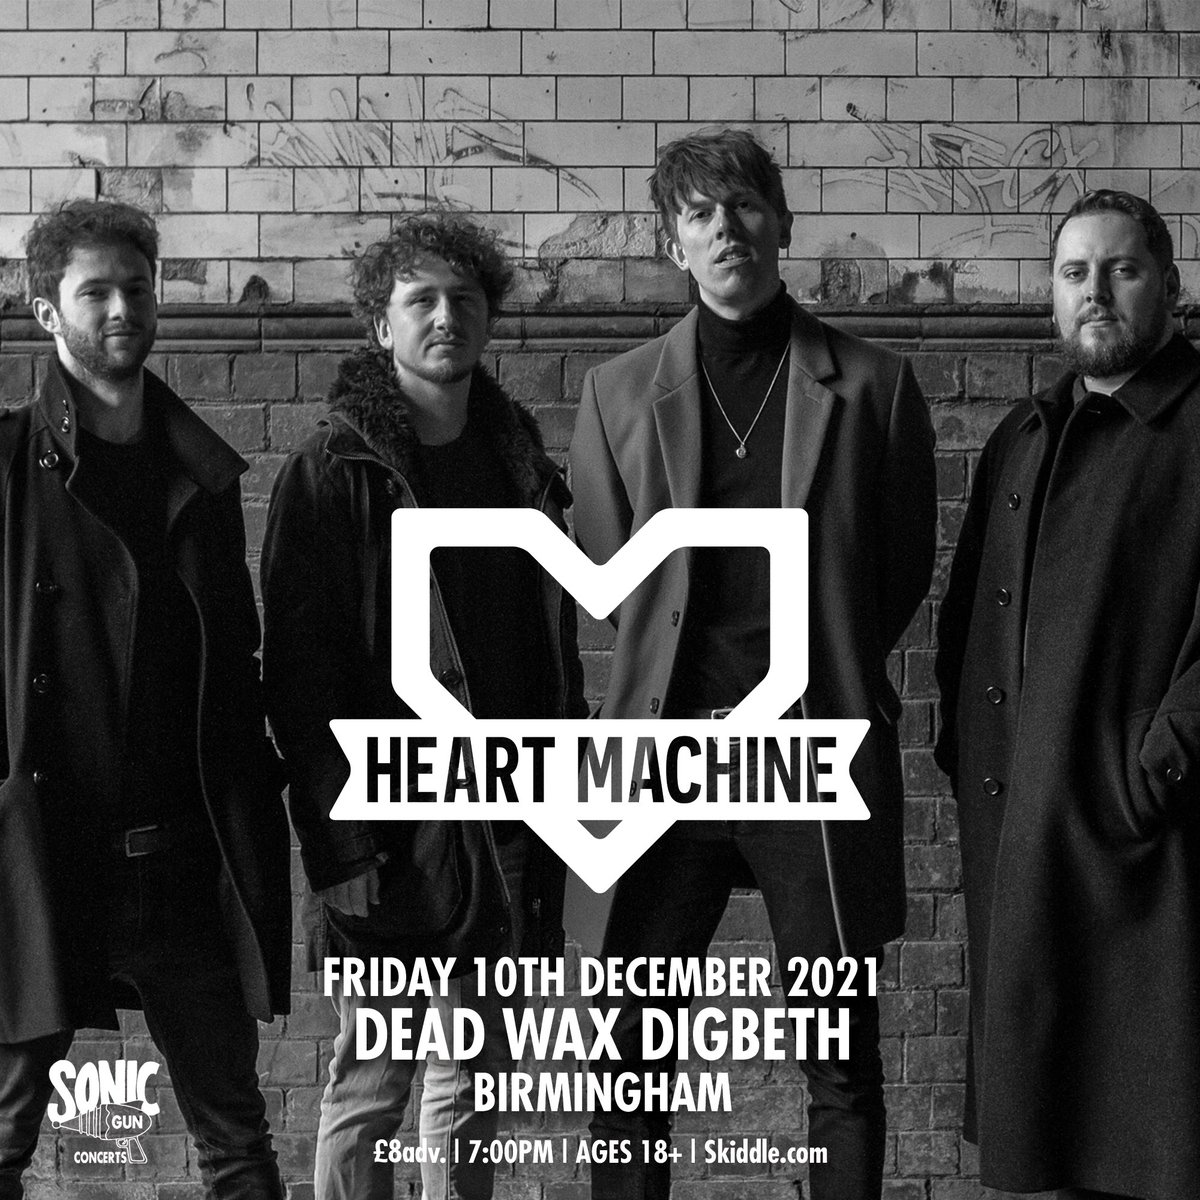 Happy to announce that we’re playing at @DeadWaxDigbeth on Friday 10th December! Tickets can be purchased following the link 👇🏻👇🏻 skiddle.com/e/35944829 #gig #livemusic #heartmachine #brum #Birmingham #deadwax #digbeth #rock #indie #unsigned